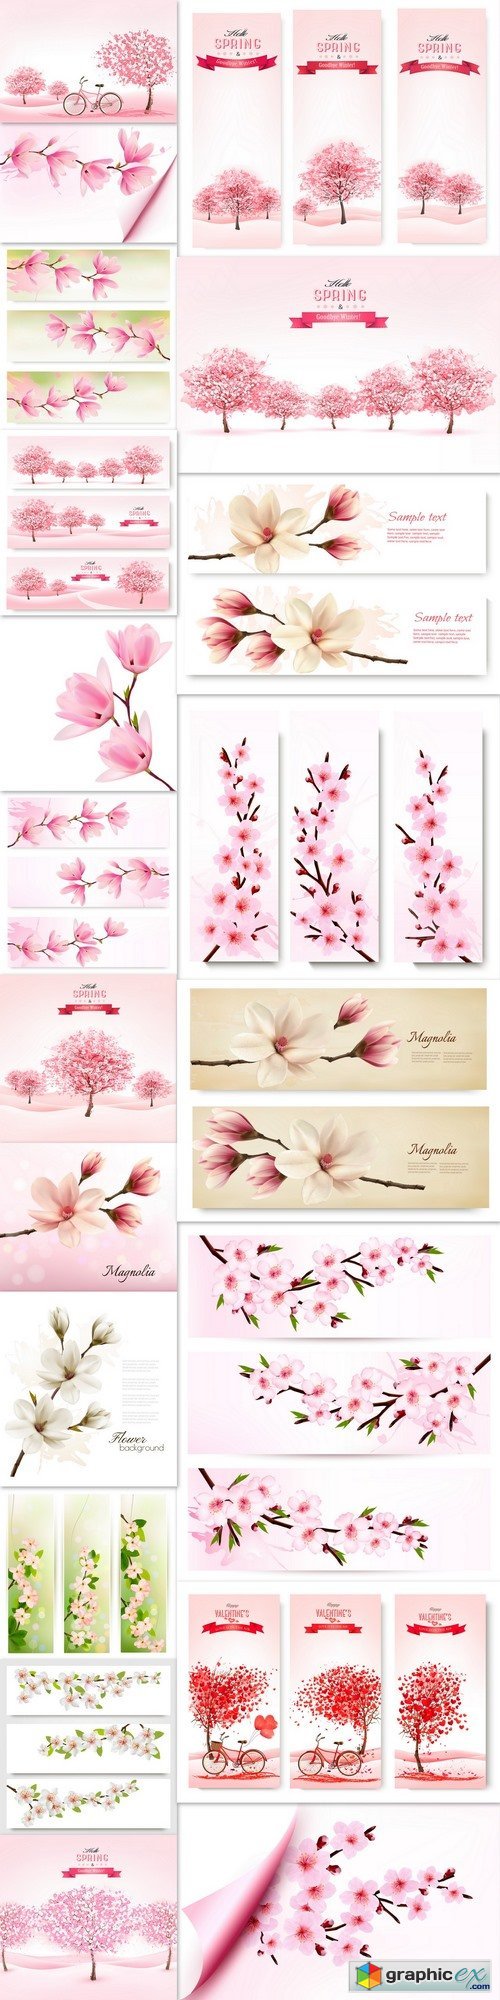 Three spring banners with pink cherry blossom trees